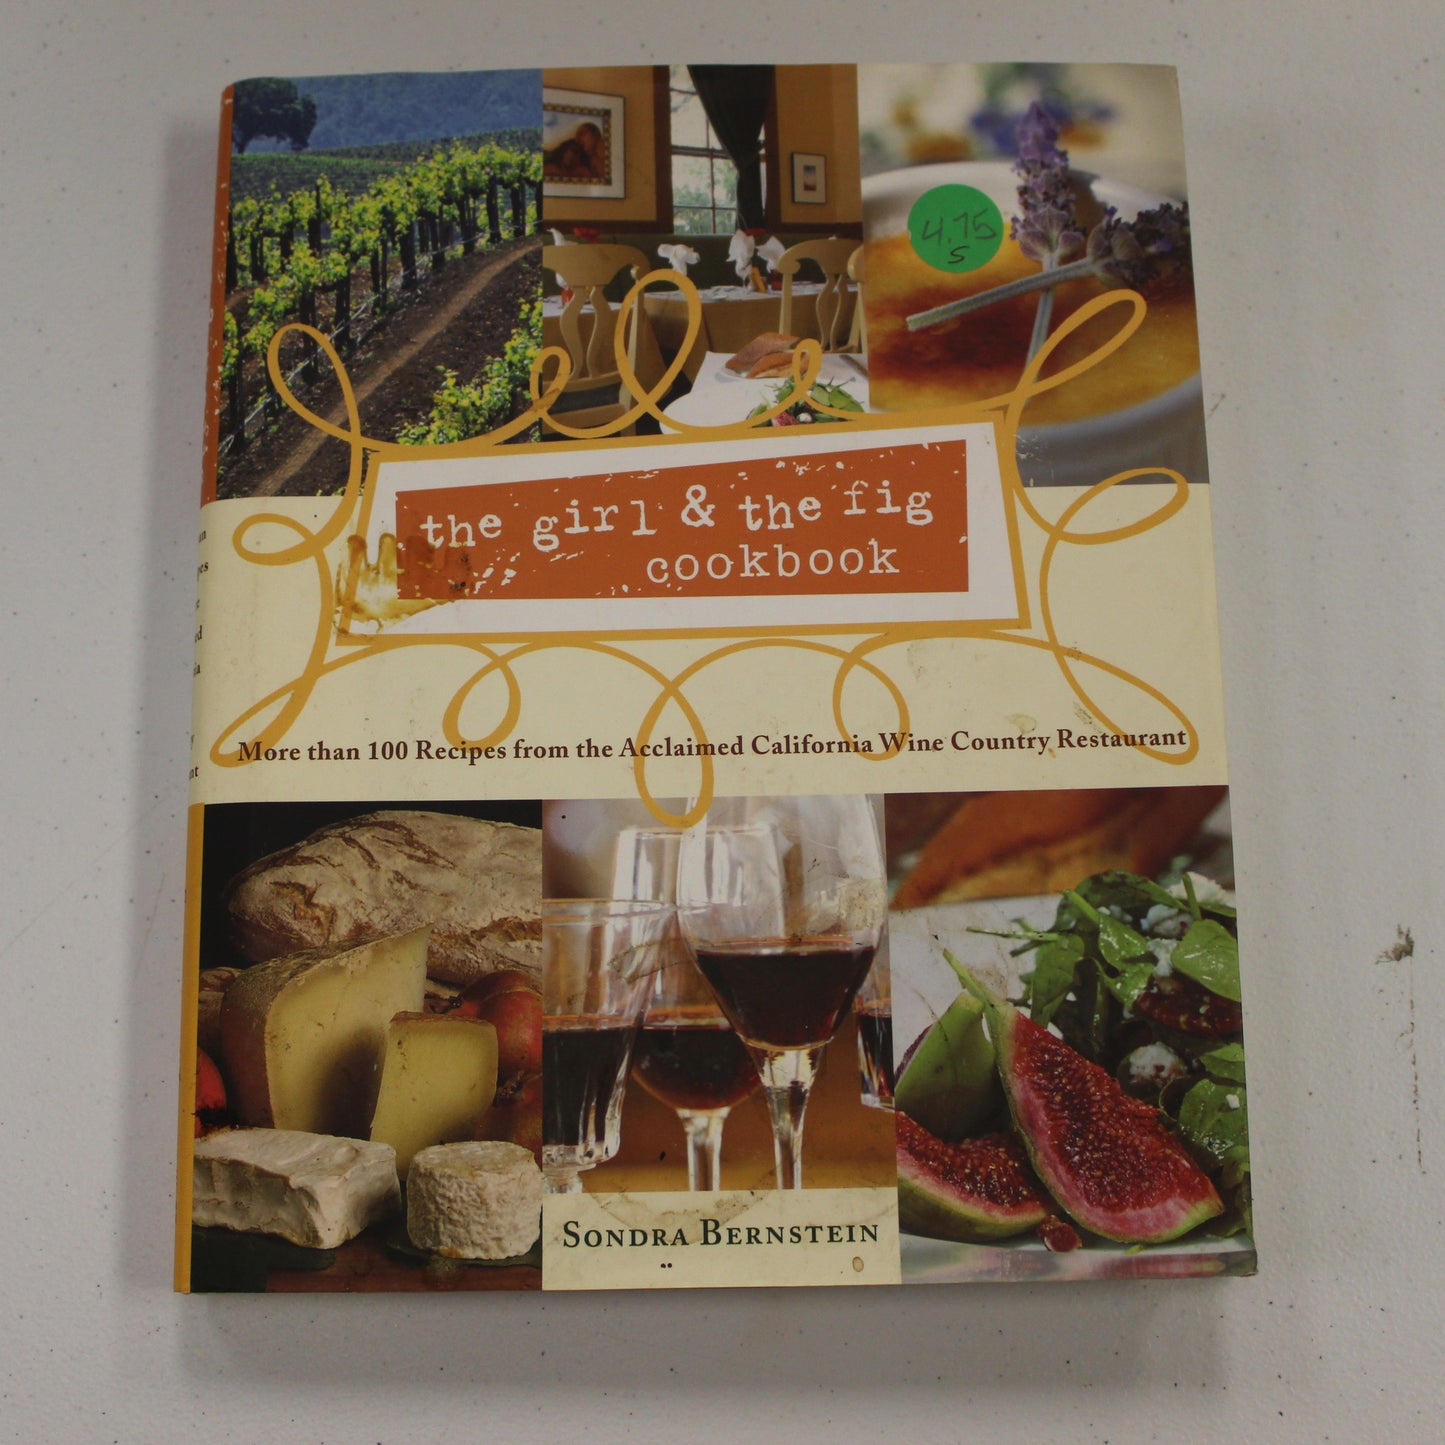 THE GIRL & THE FIG COOKBOOK